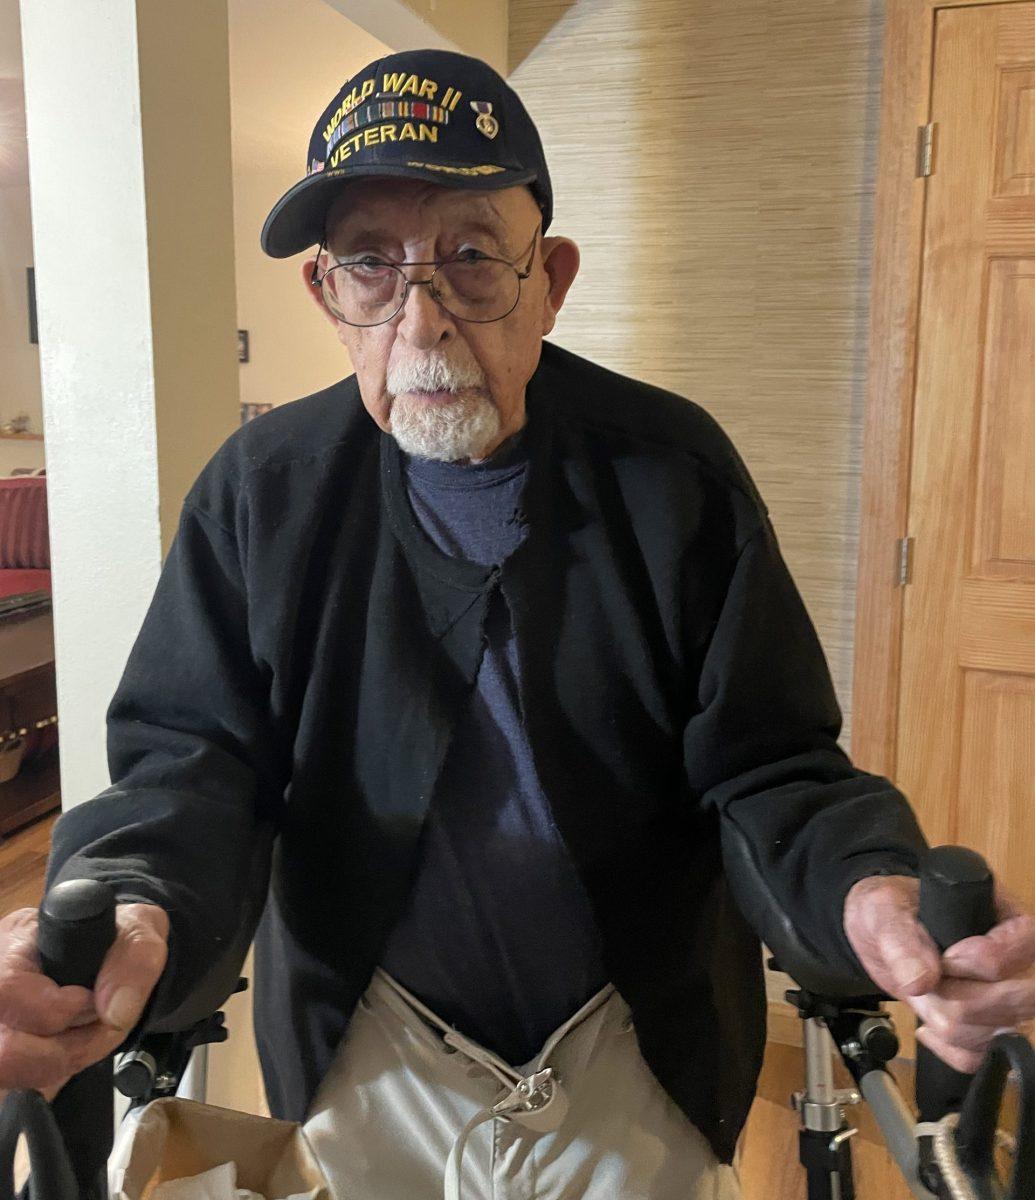 Eugene+T.+Muniz%2C+a+World+War+II+veteran%2C+served+four+years+in+the+Army+before+being+honorably+discharged+as+a+corporal.+The+Puebloan+will+turn+102+on+Monday.+%5BToday+photo%2FAlorah+Saldana-Vigil%5D